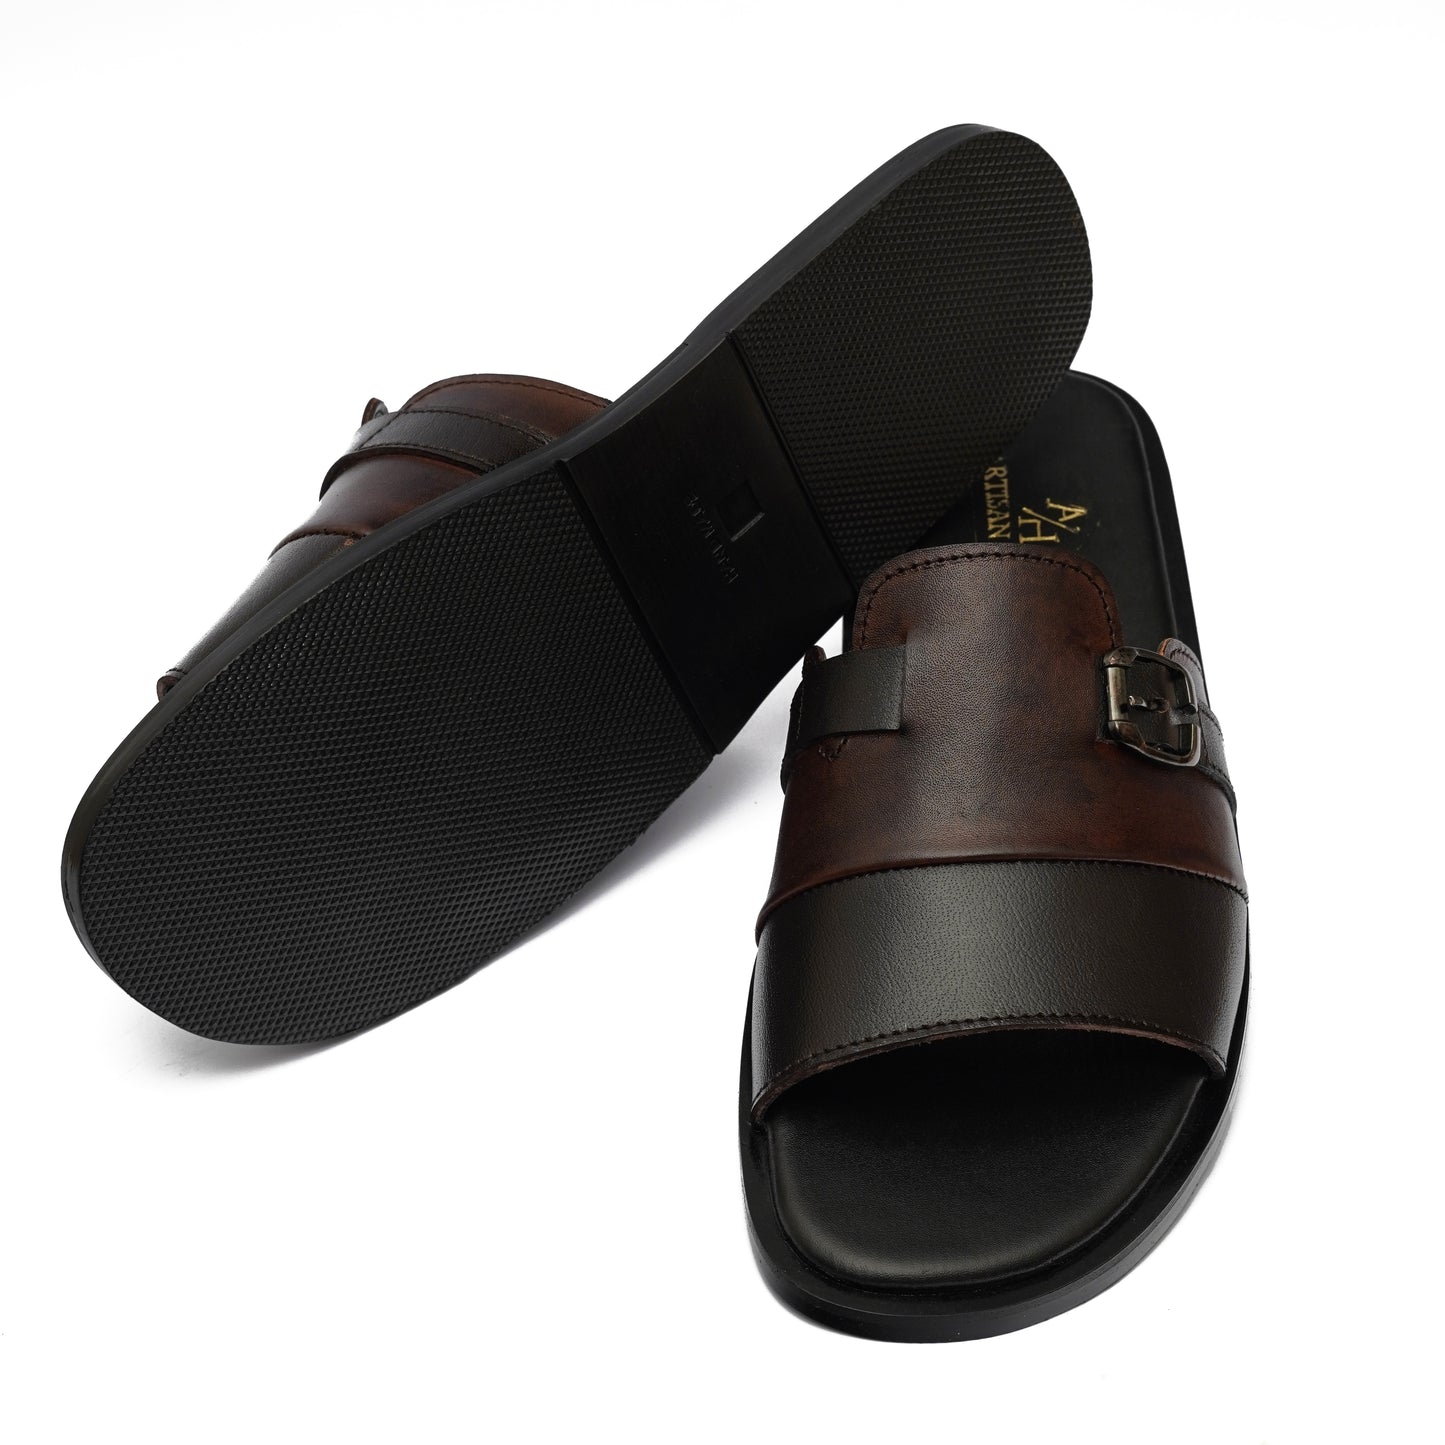 BROWN MONK LEATHER SLIPPPER